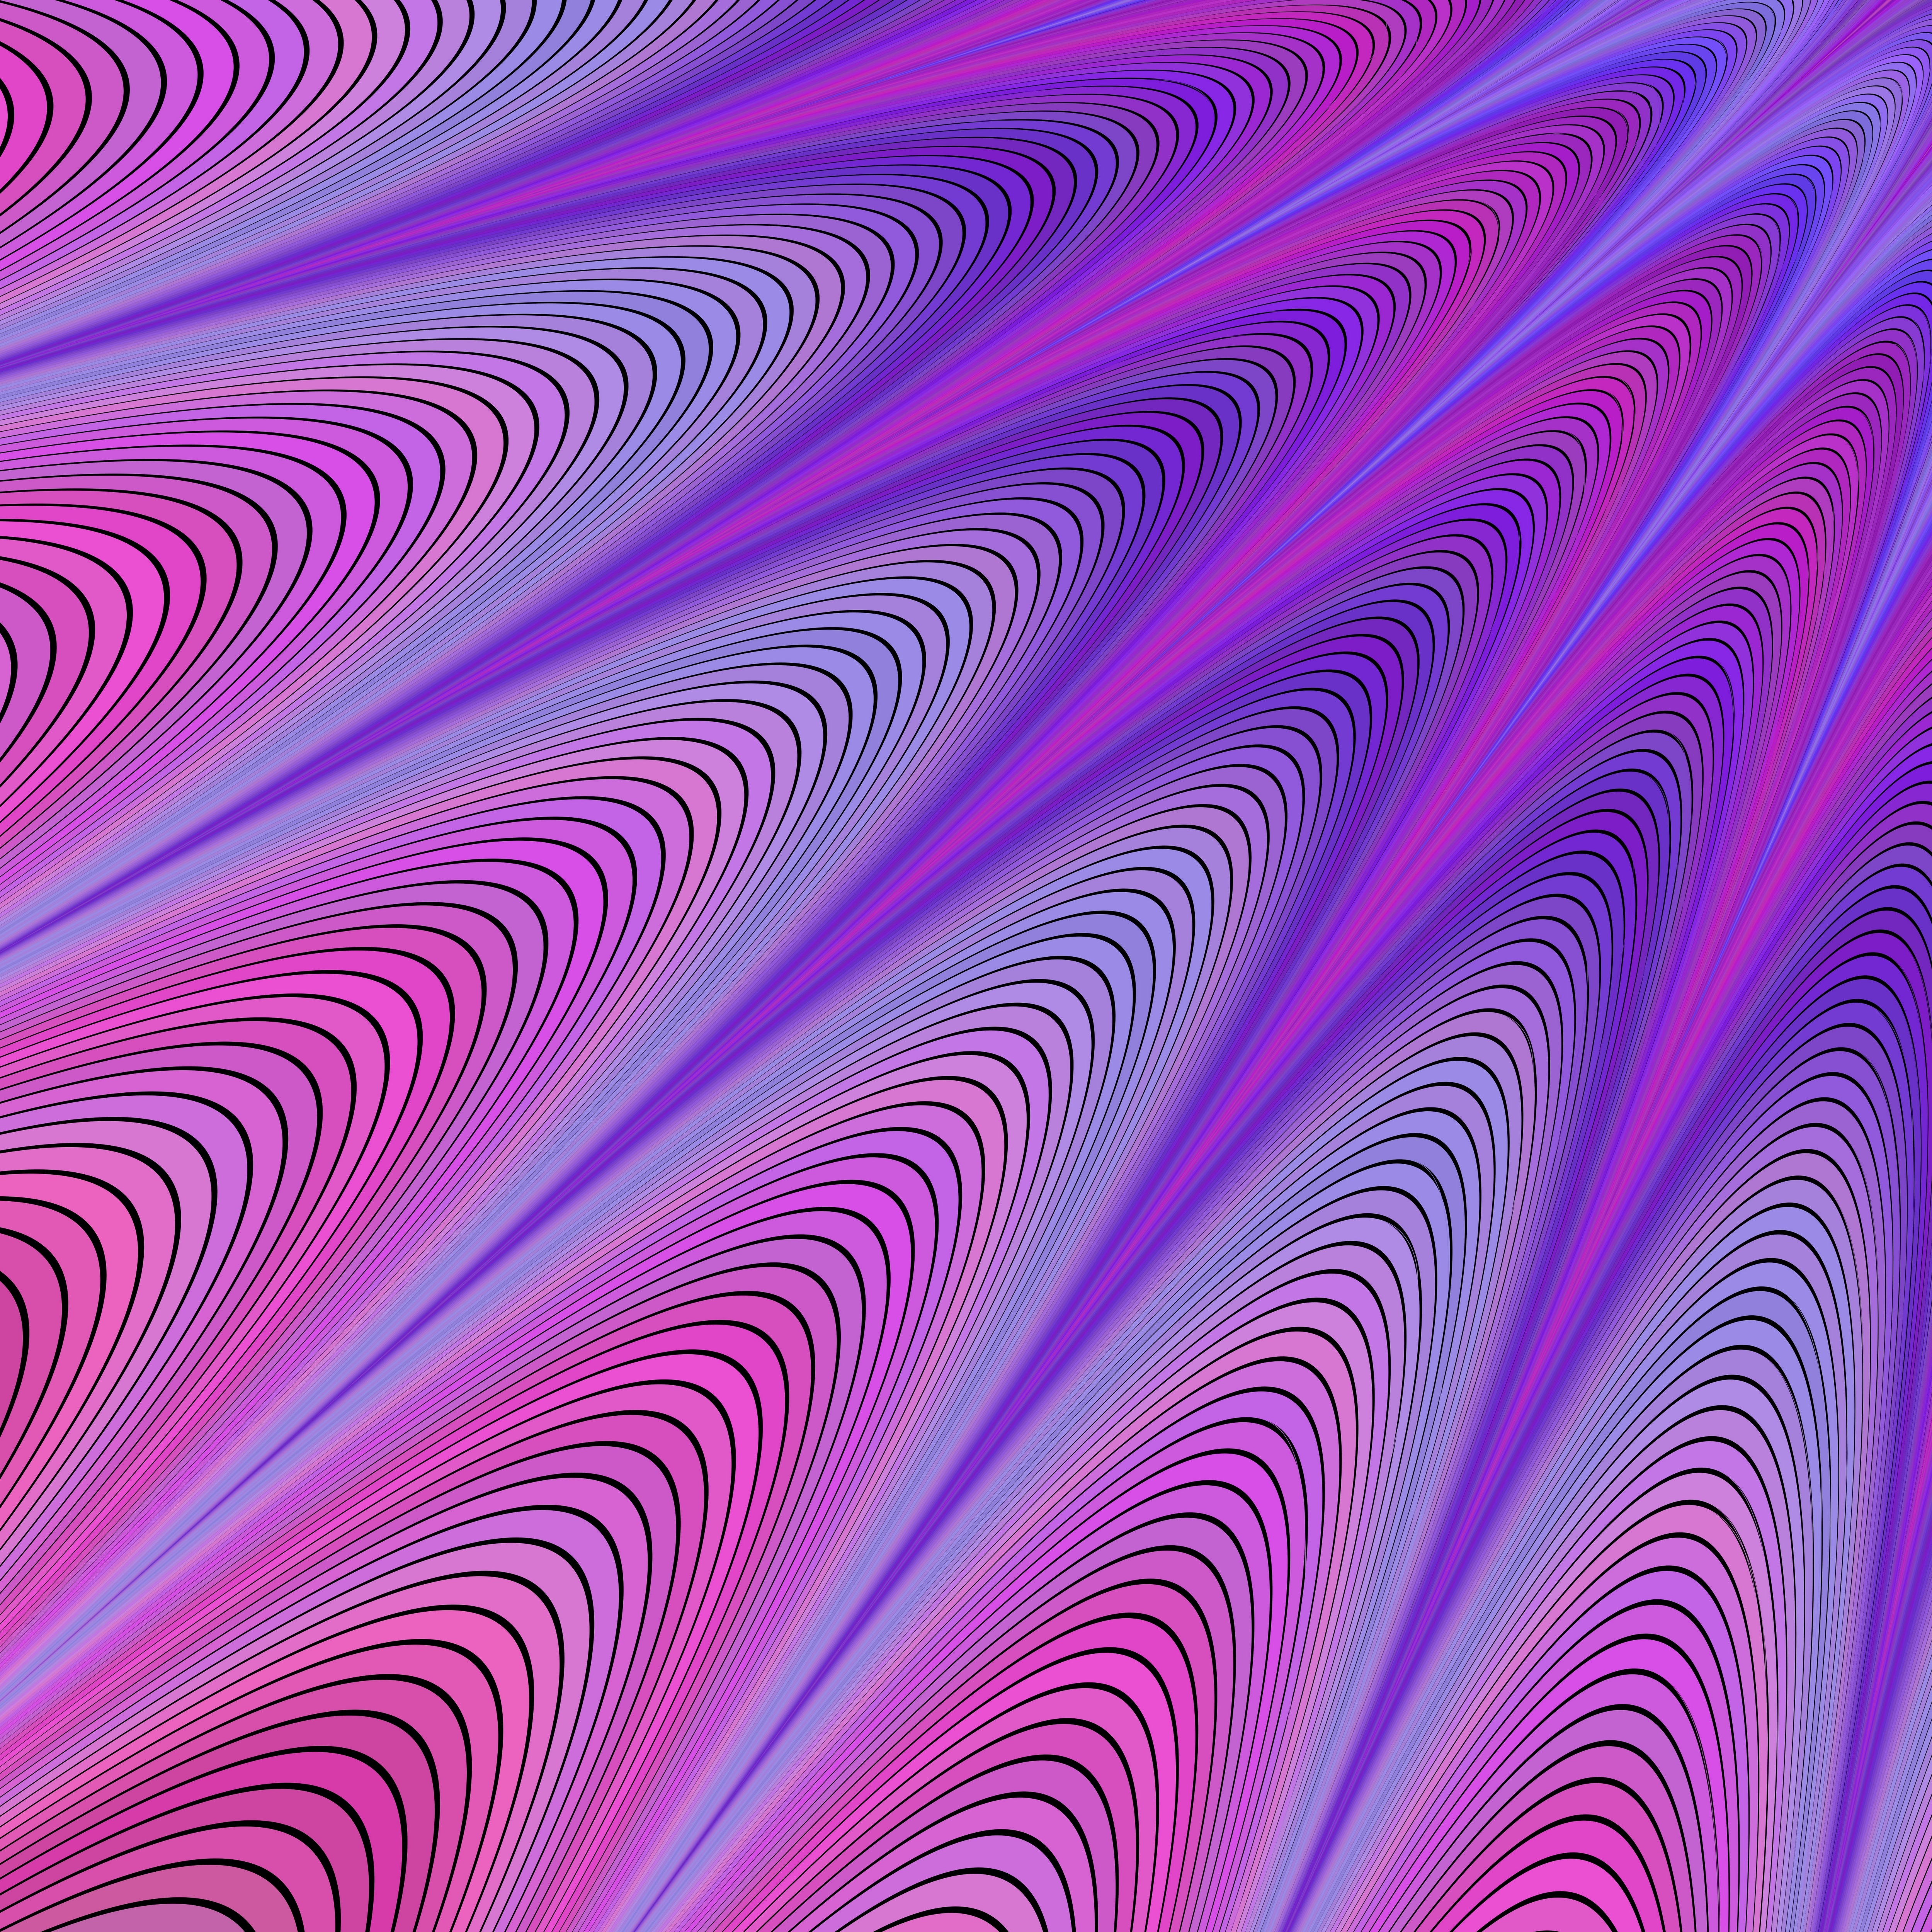 patterns, raised, relief, pink download for free